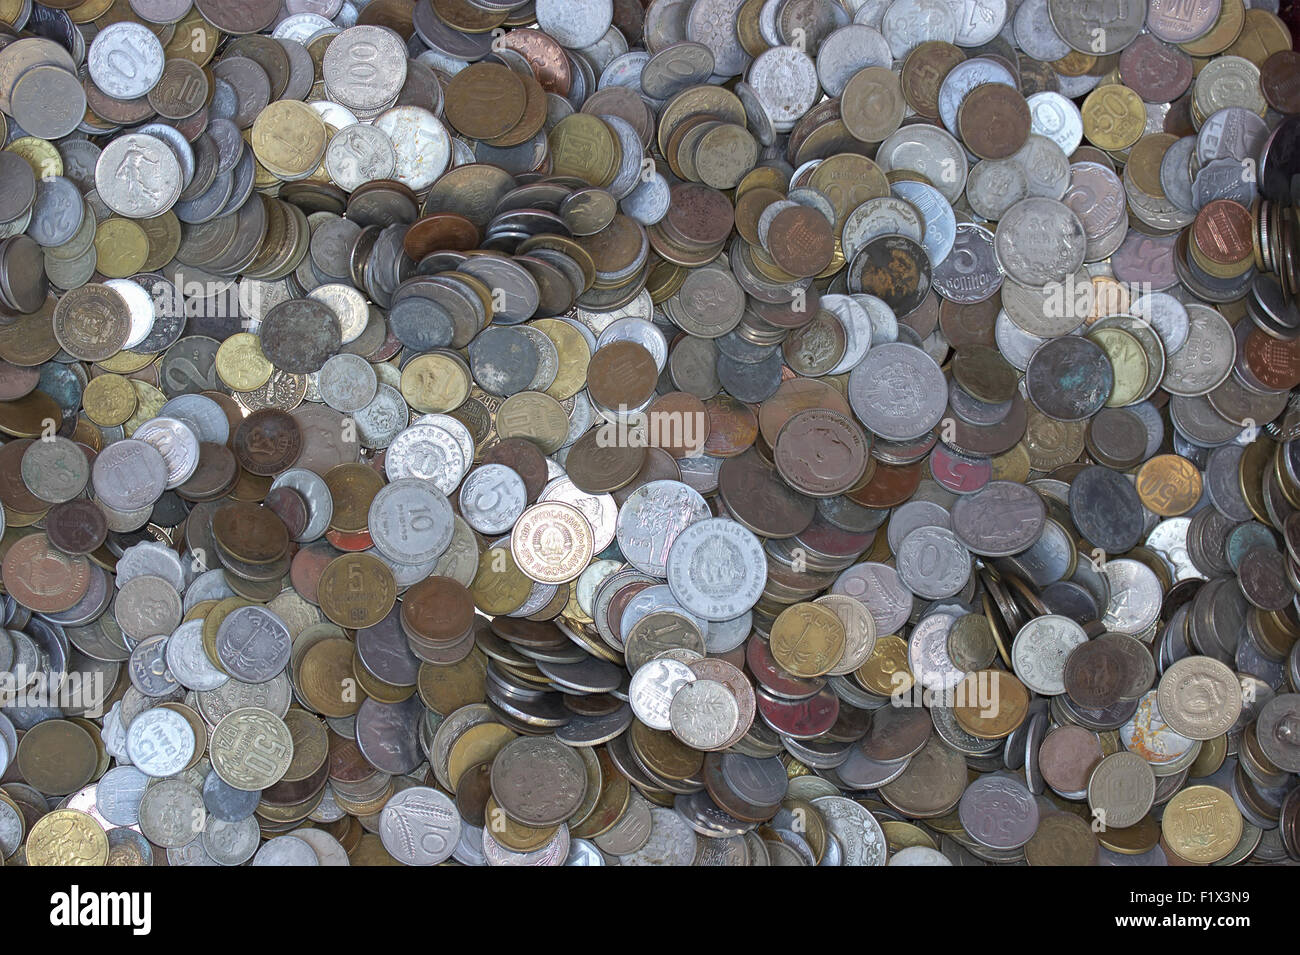 close up photo of old coins. Stock Photo